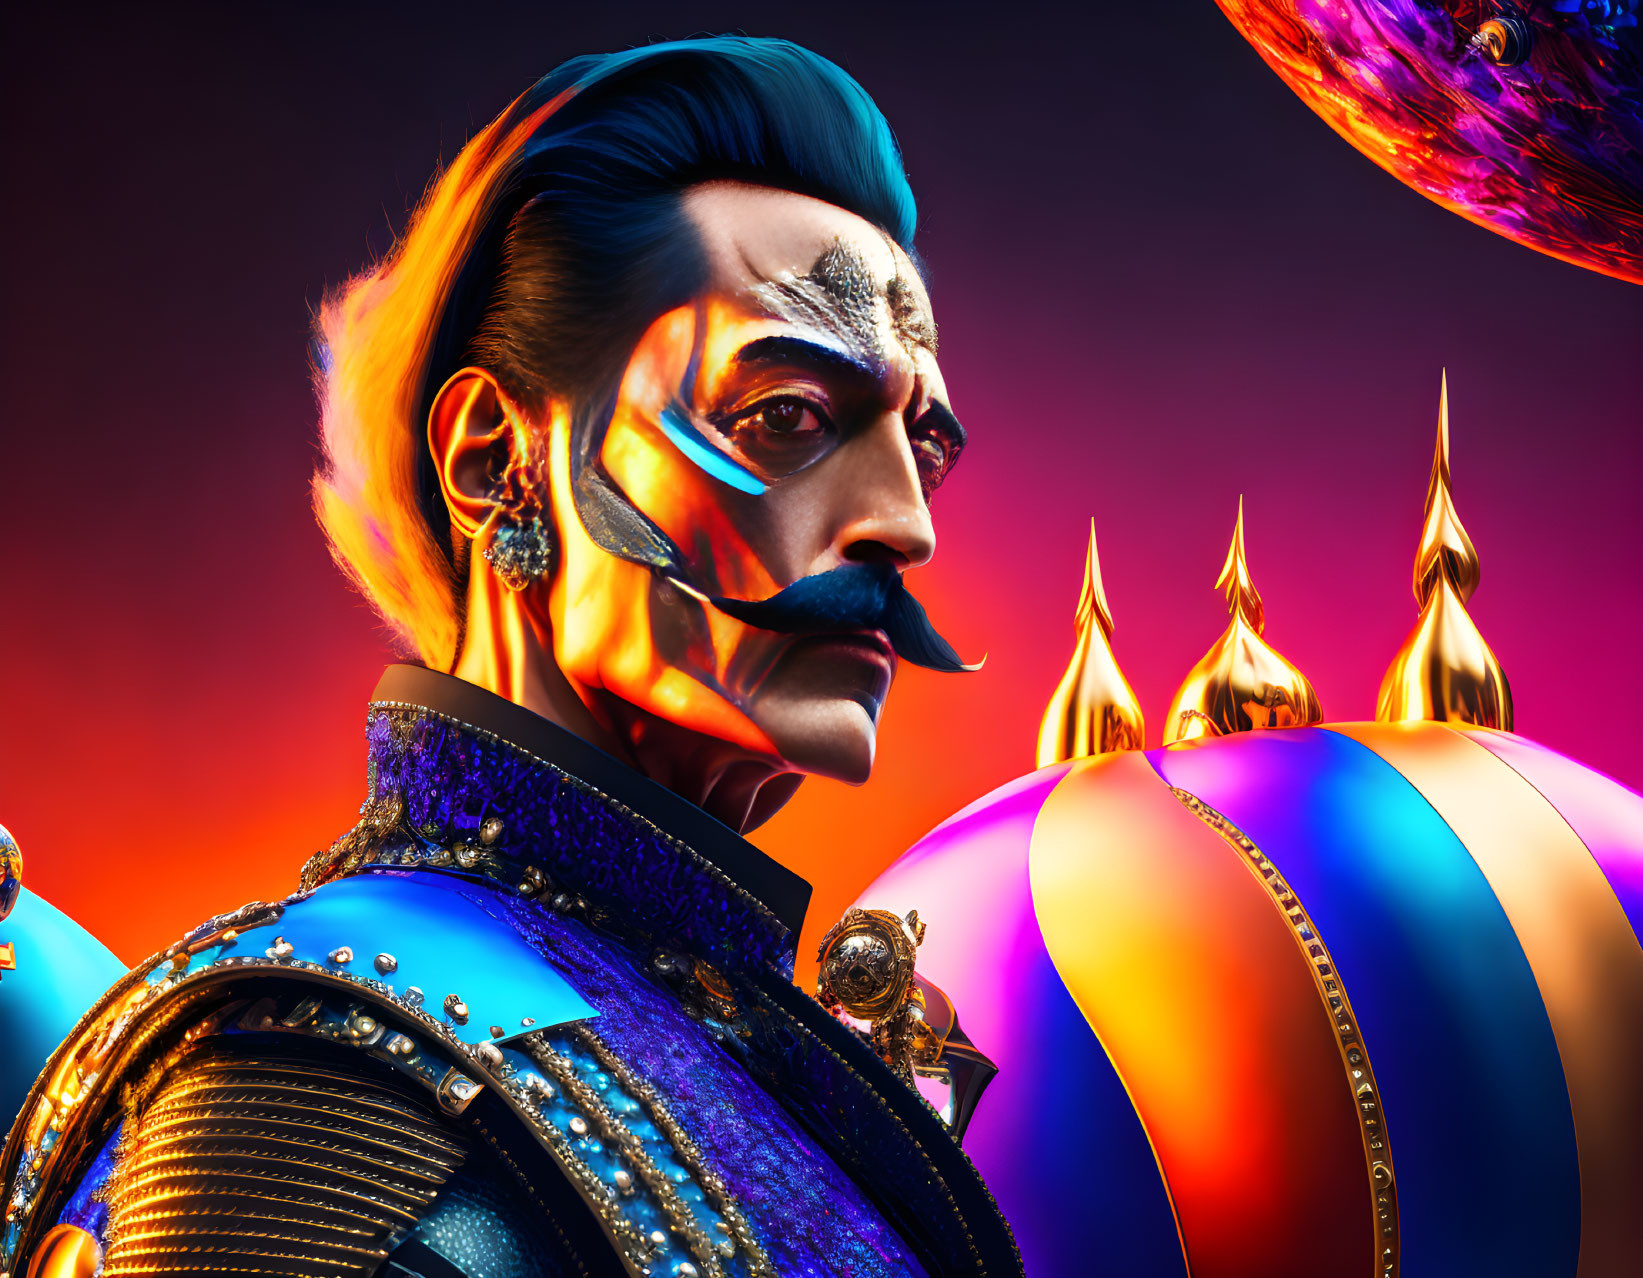 Colorful digital artwork of a man in decorative armor with unique facial hair and makeup, surrounded by fiery